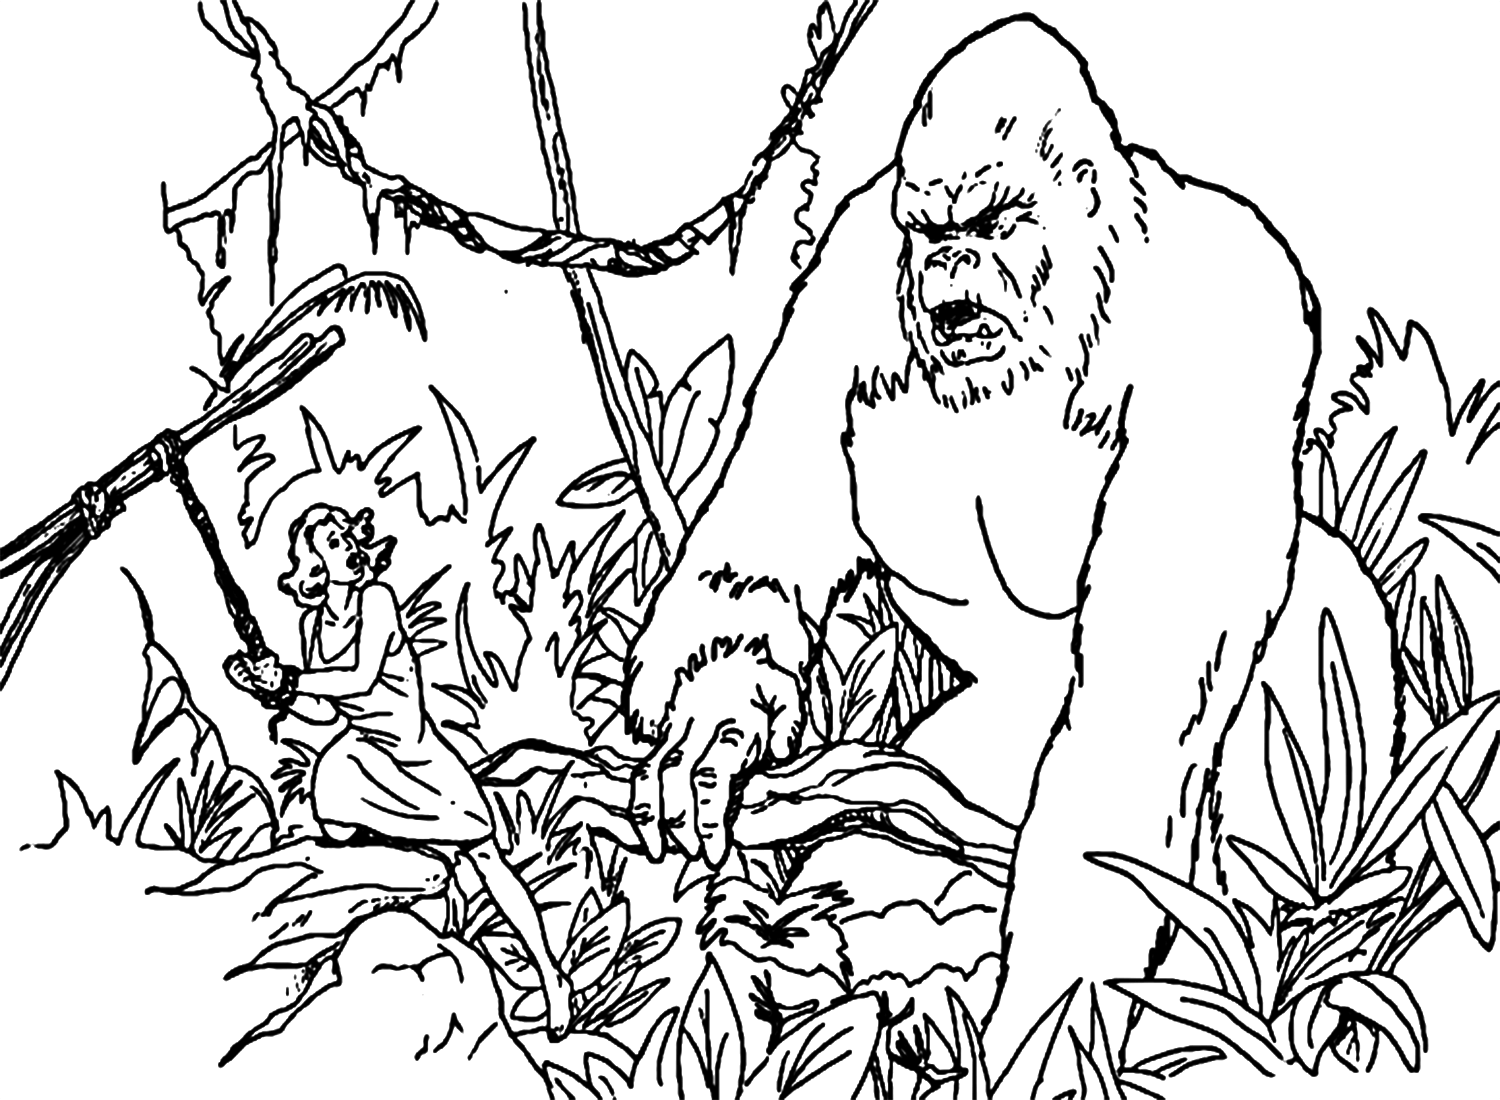 King Kong Meets Ann Coloring Page